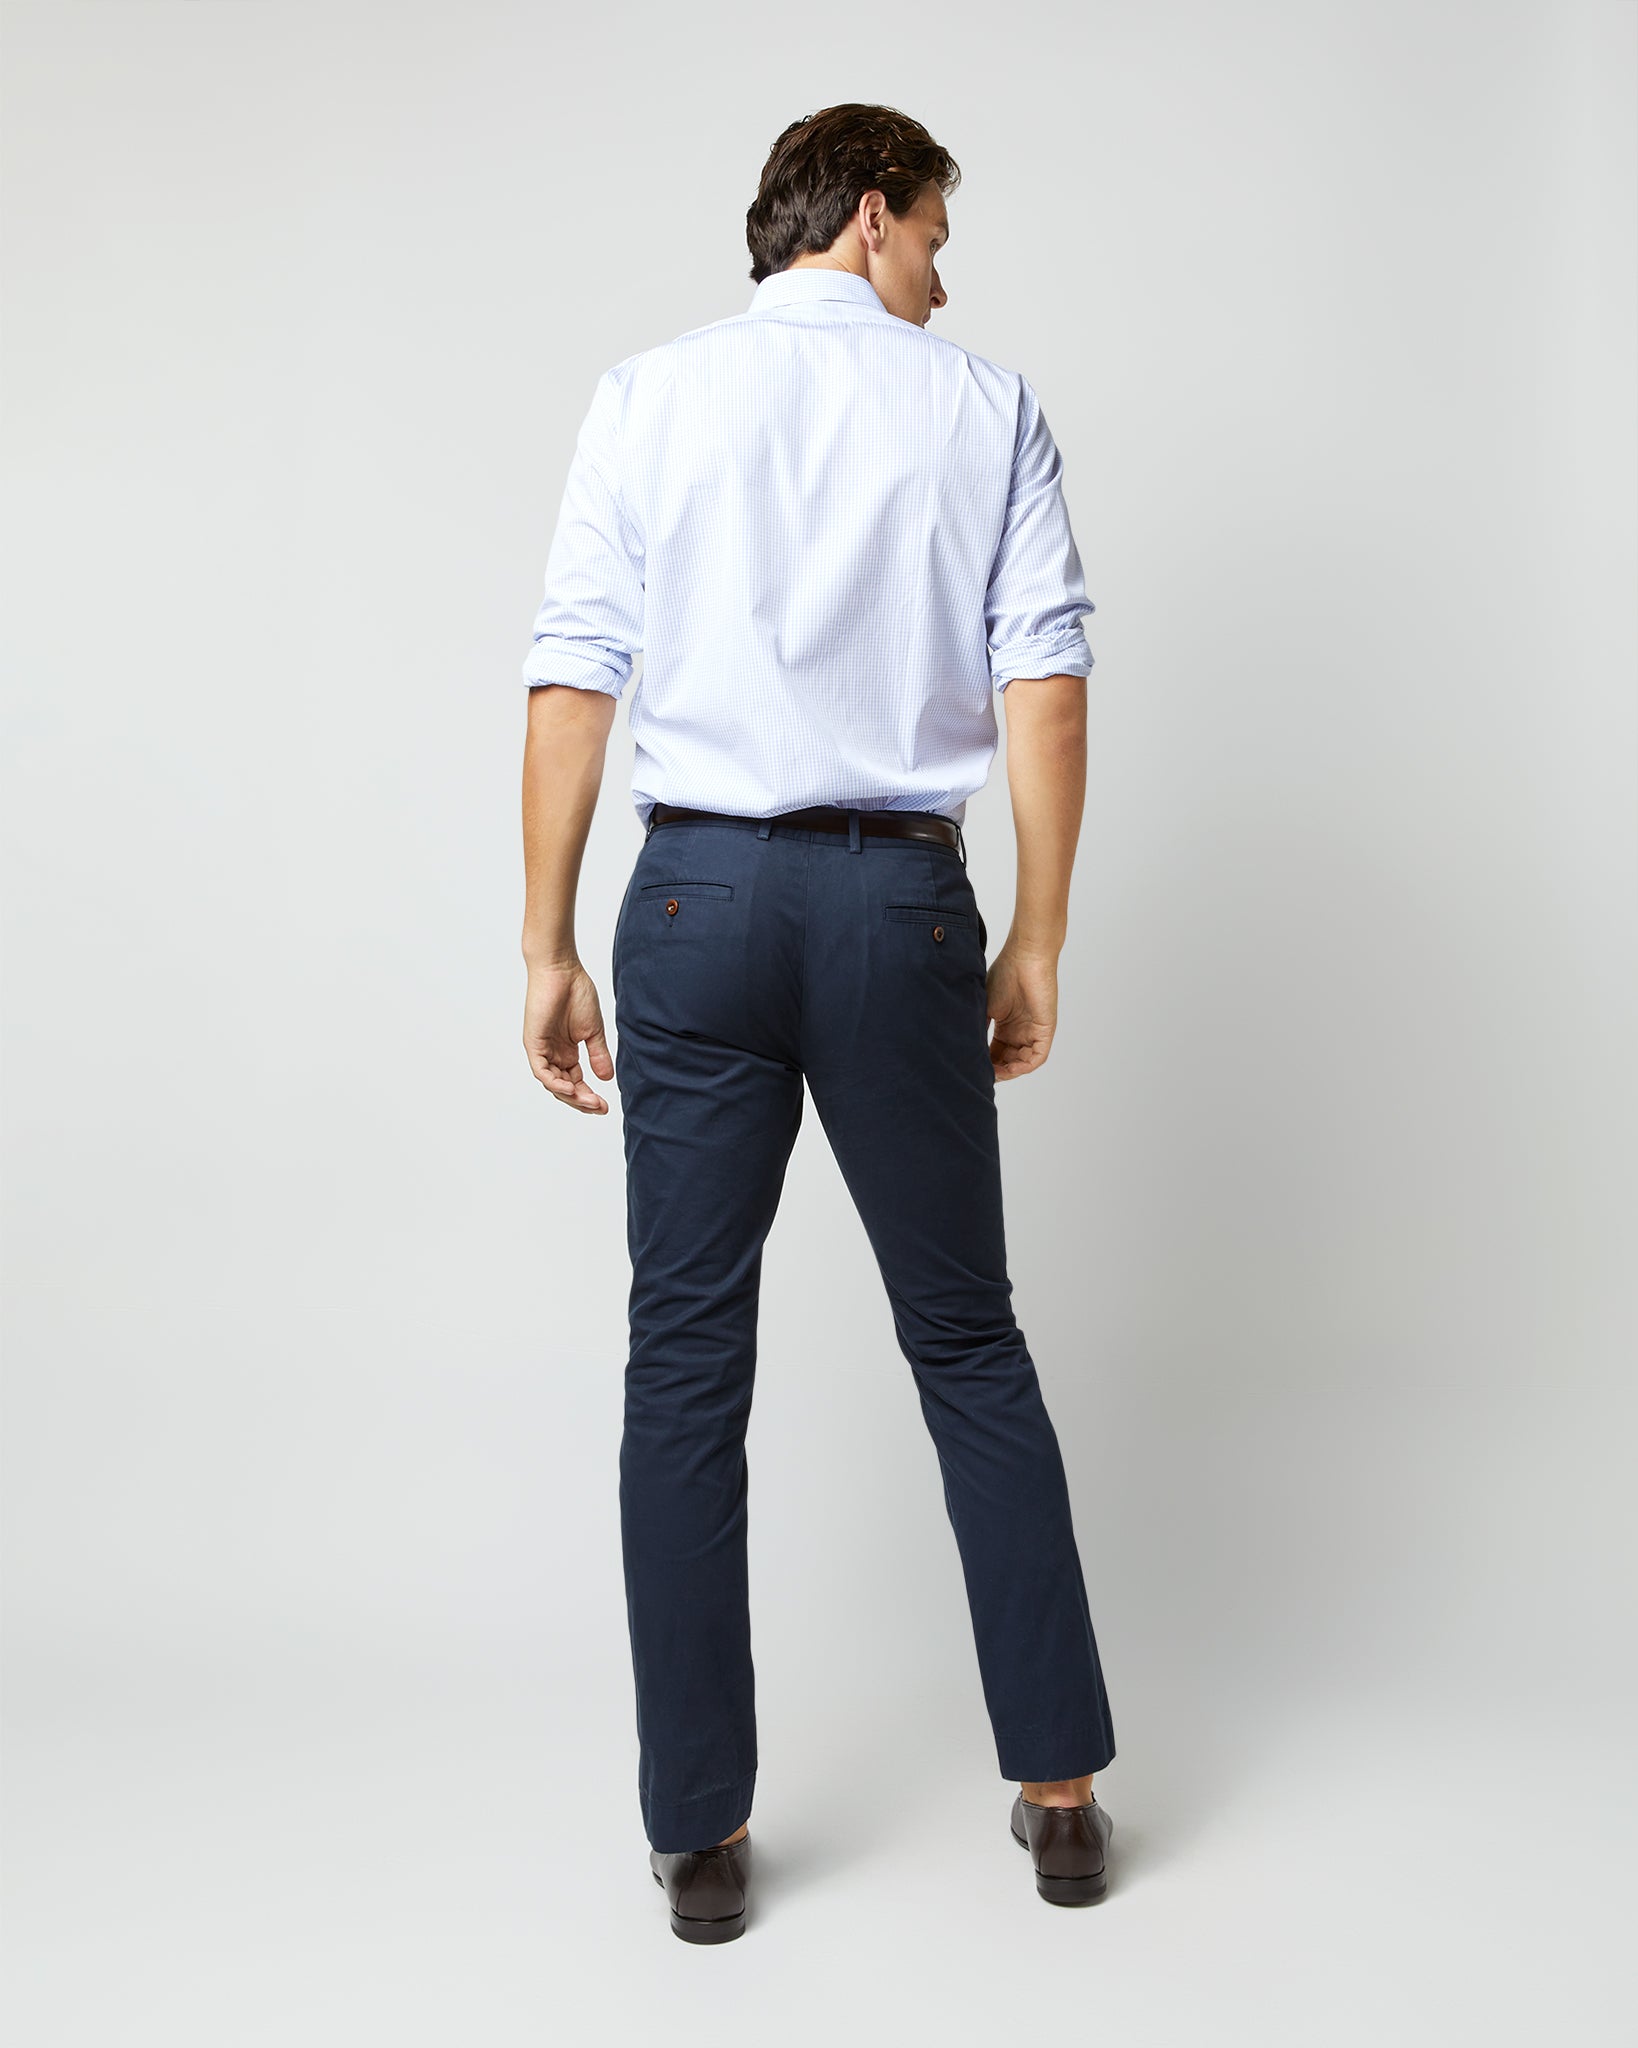 Garment-Dyed Field Pant in Navy AP Lightweight Twill